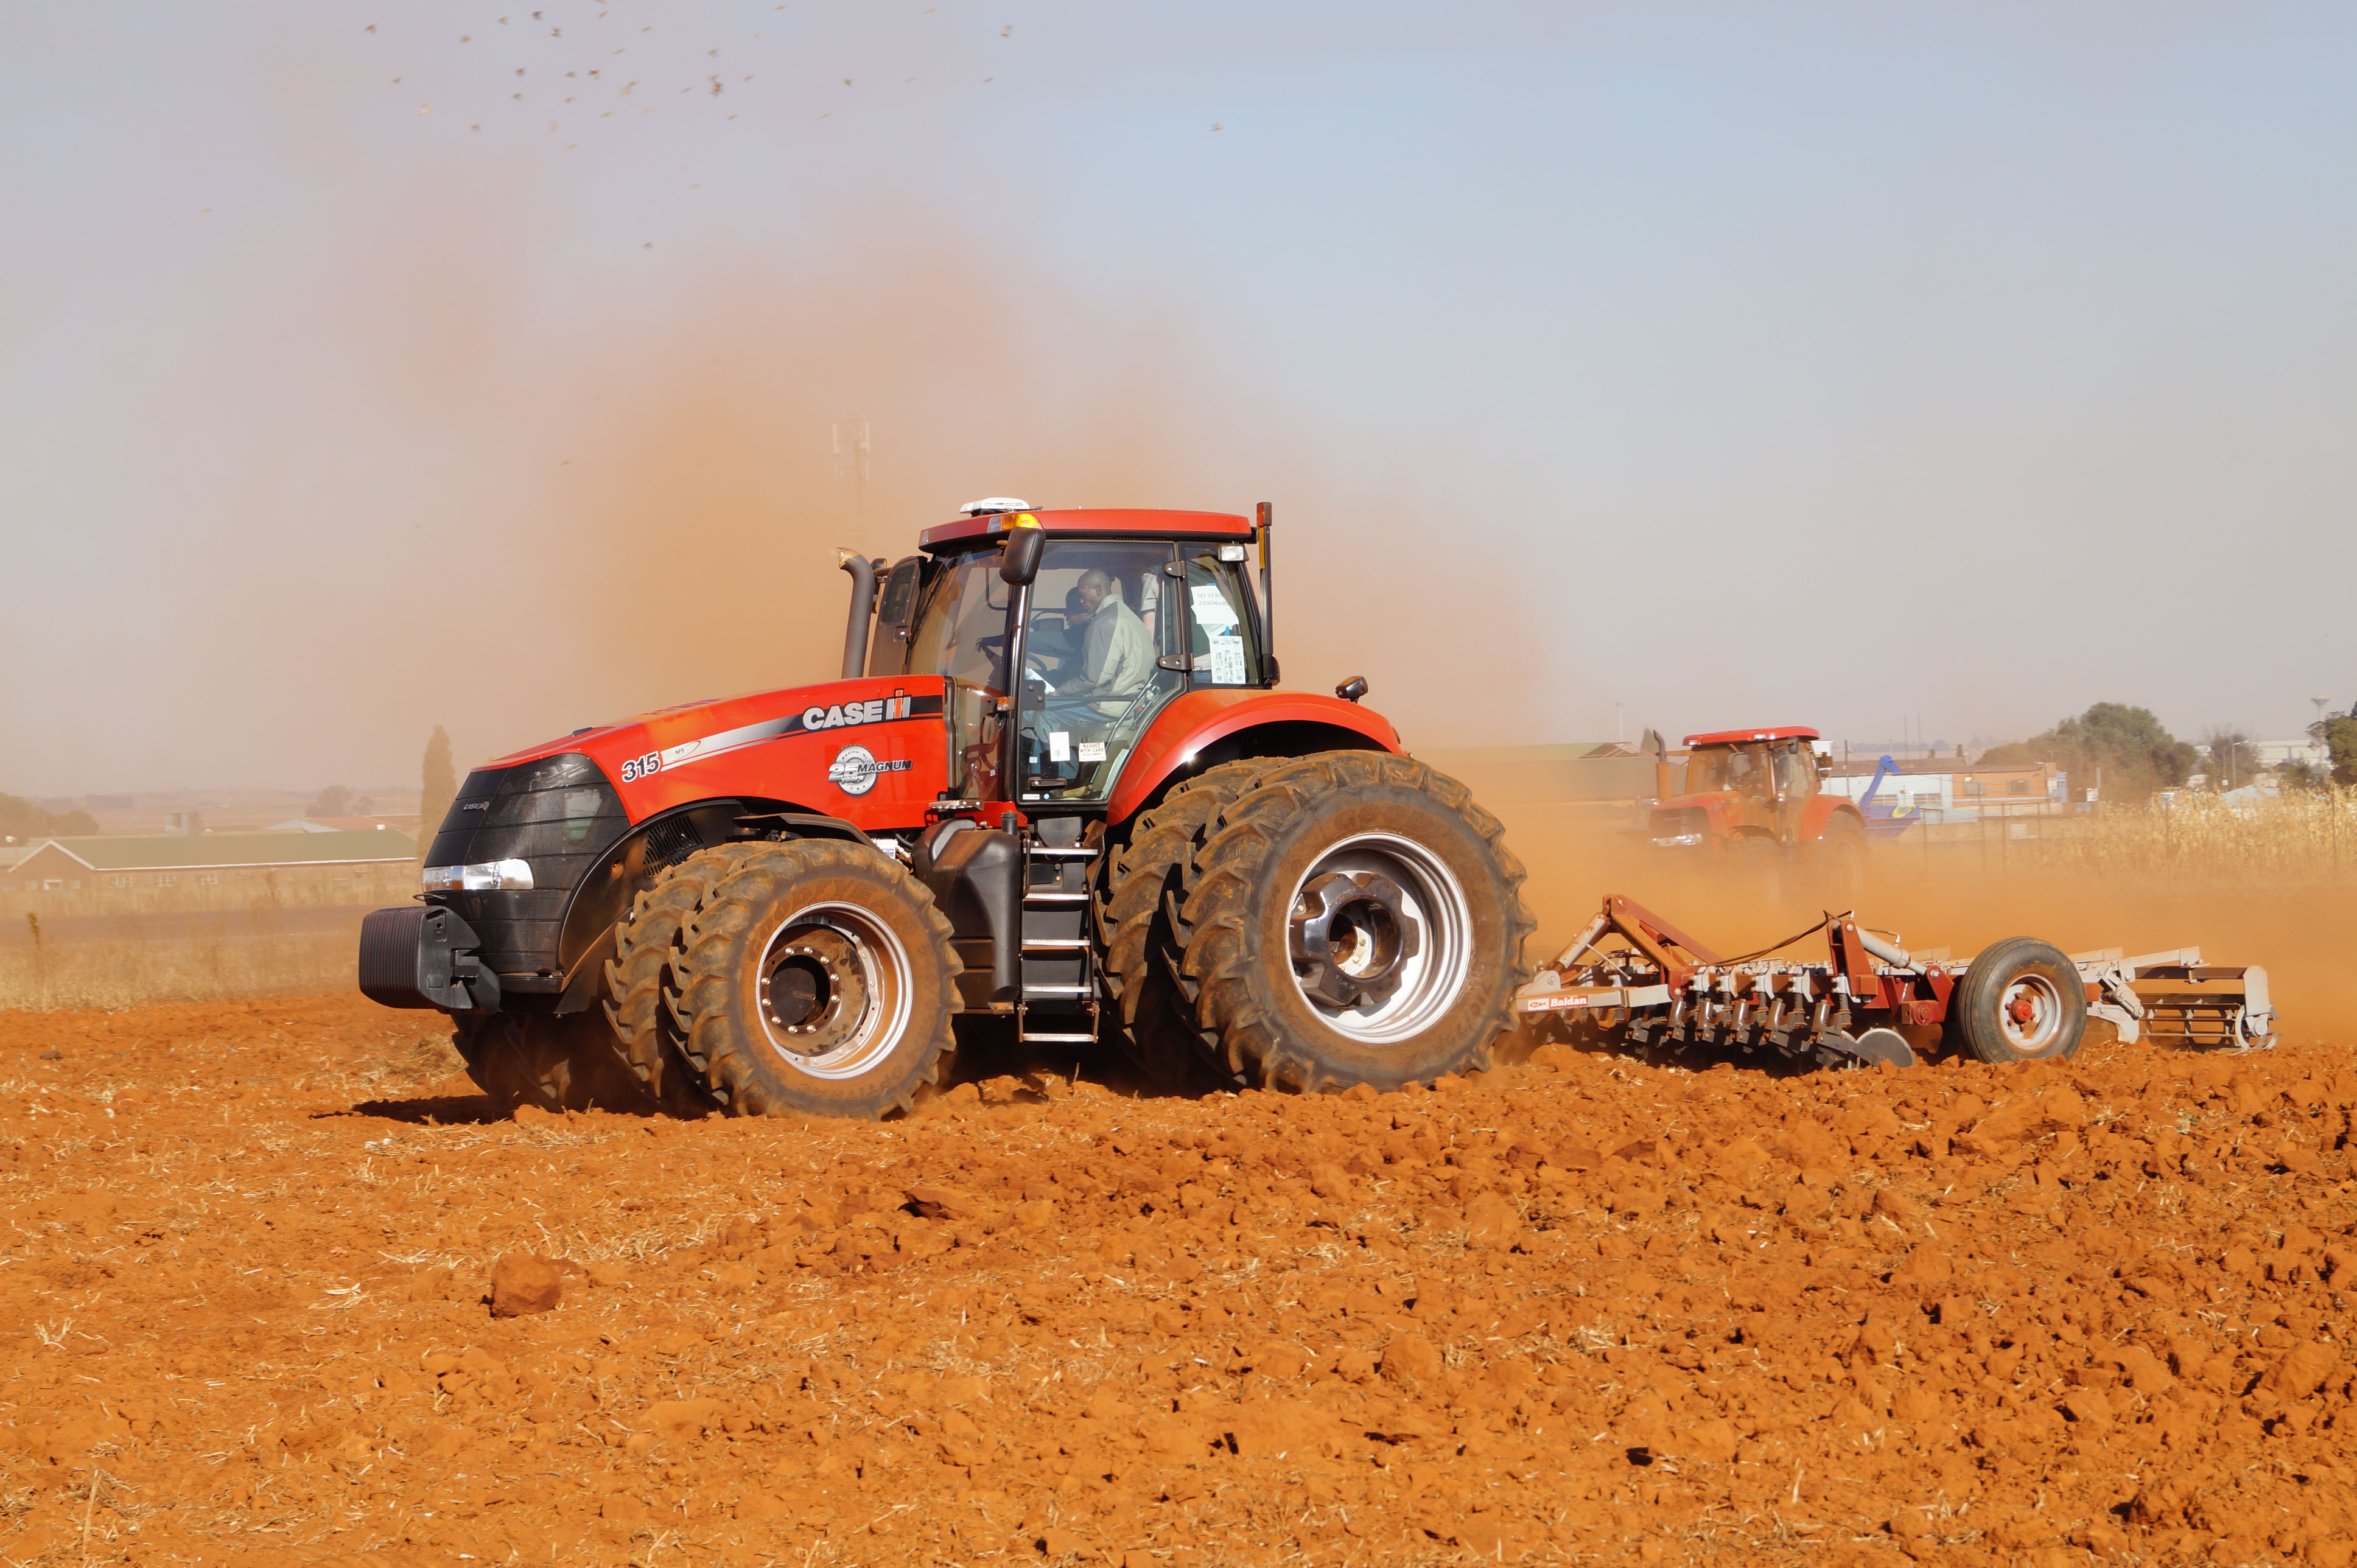 CASE IH FURTHER STRENGTHENS THE SUPPORT TO ITS LOCAL DEALER NETWORK WITH A BIG TRACTOR TRAINING INITIATIVE IN SOUTH AFRICA